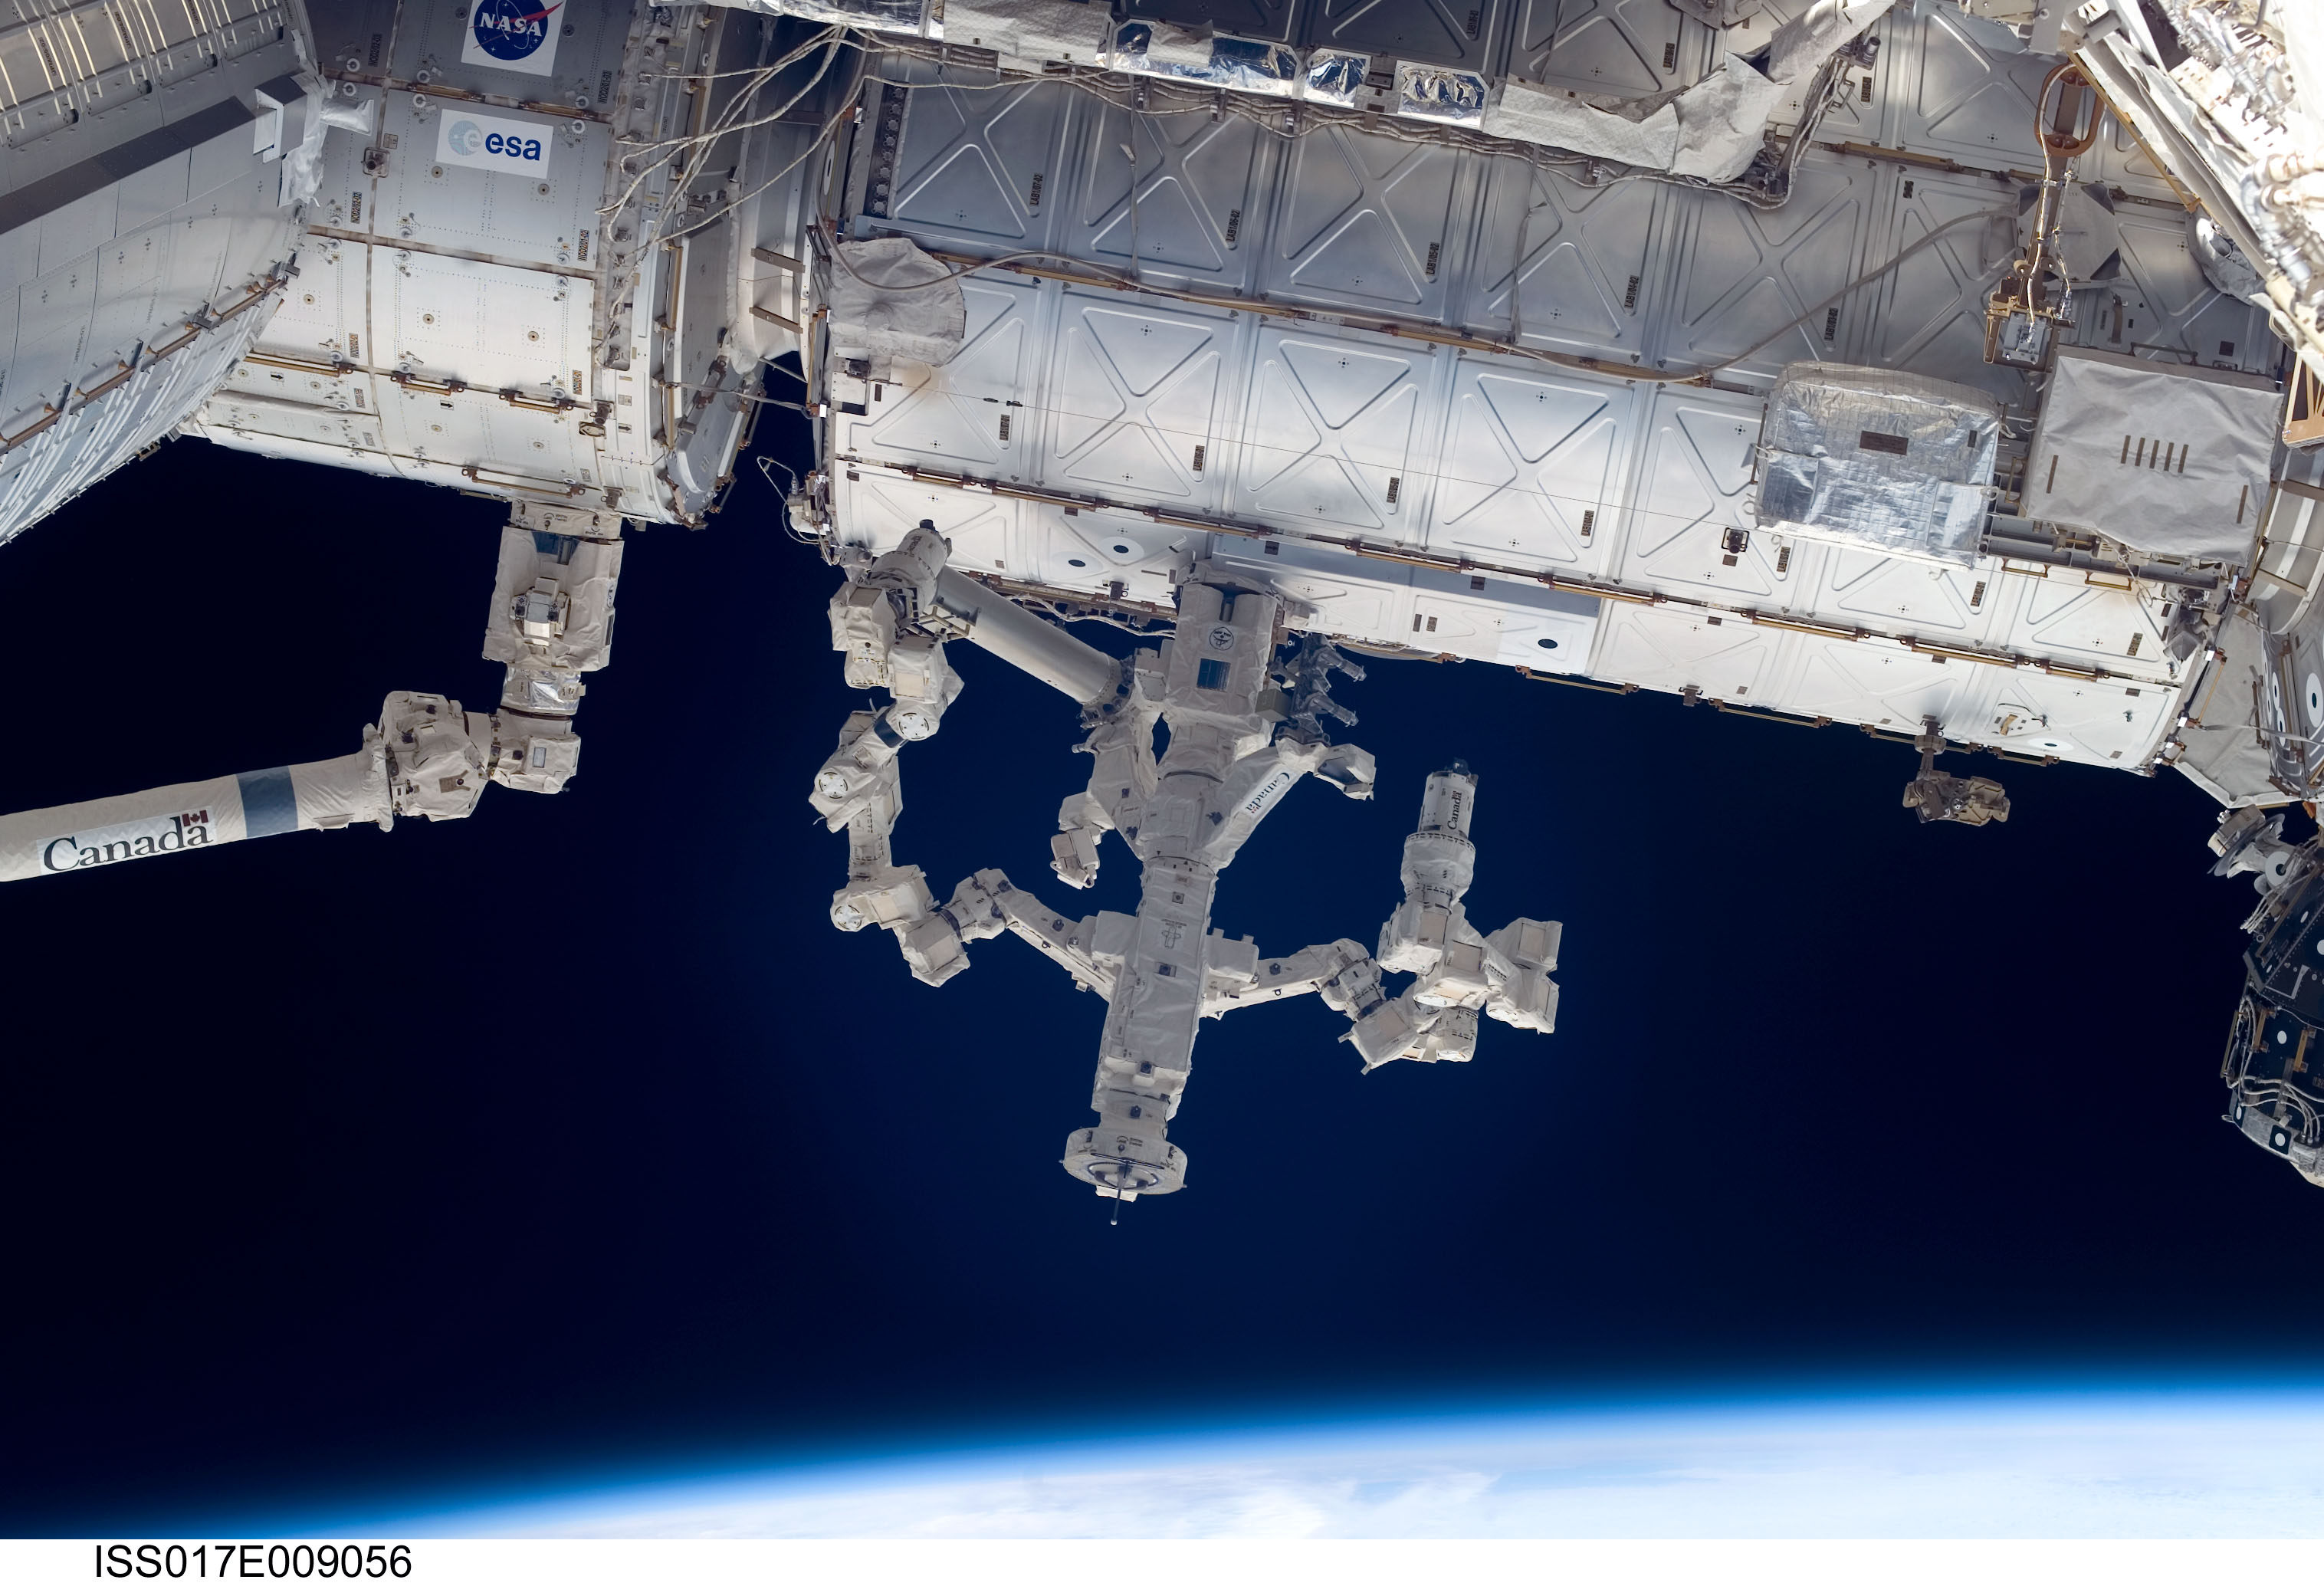 Dextre Robot at Work on the Space Station